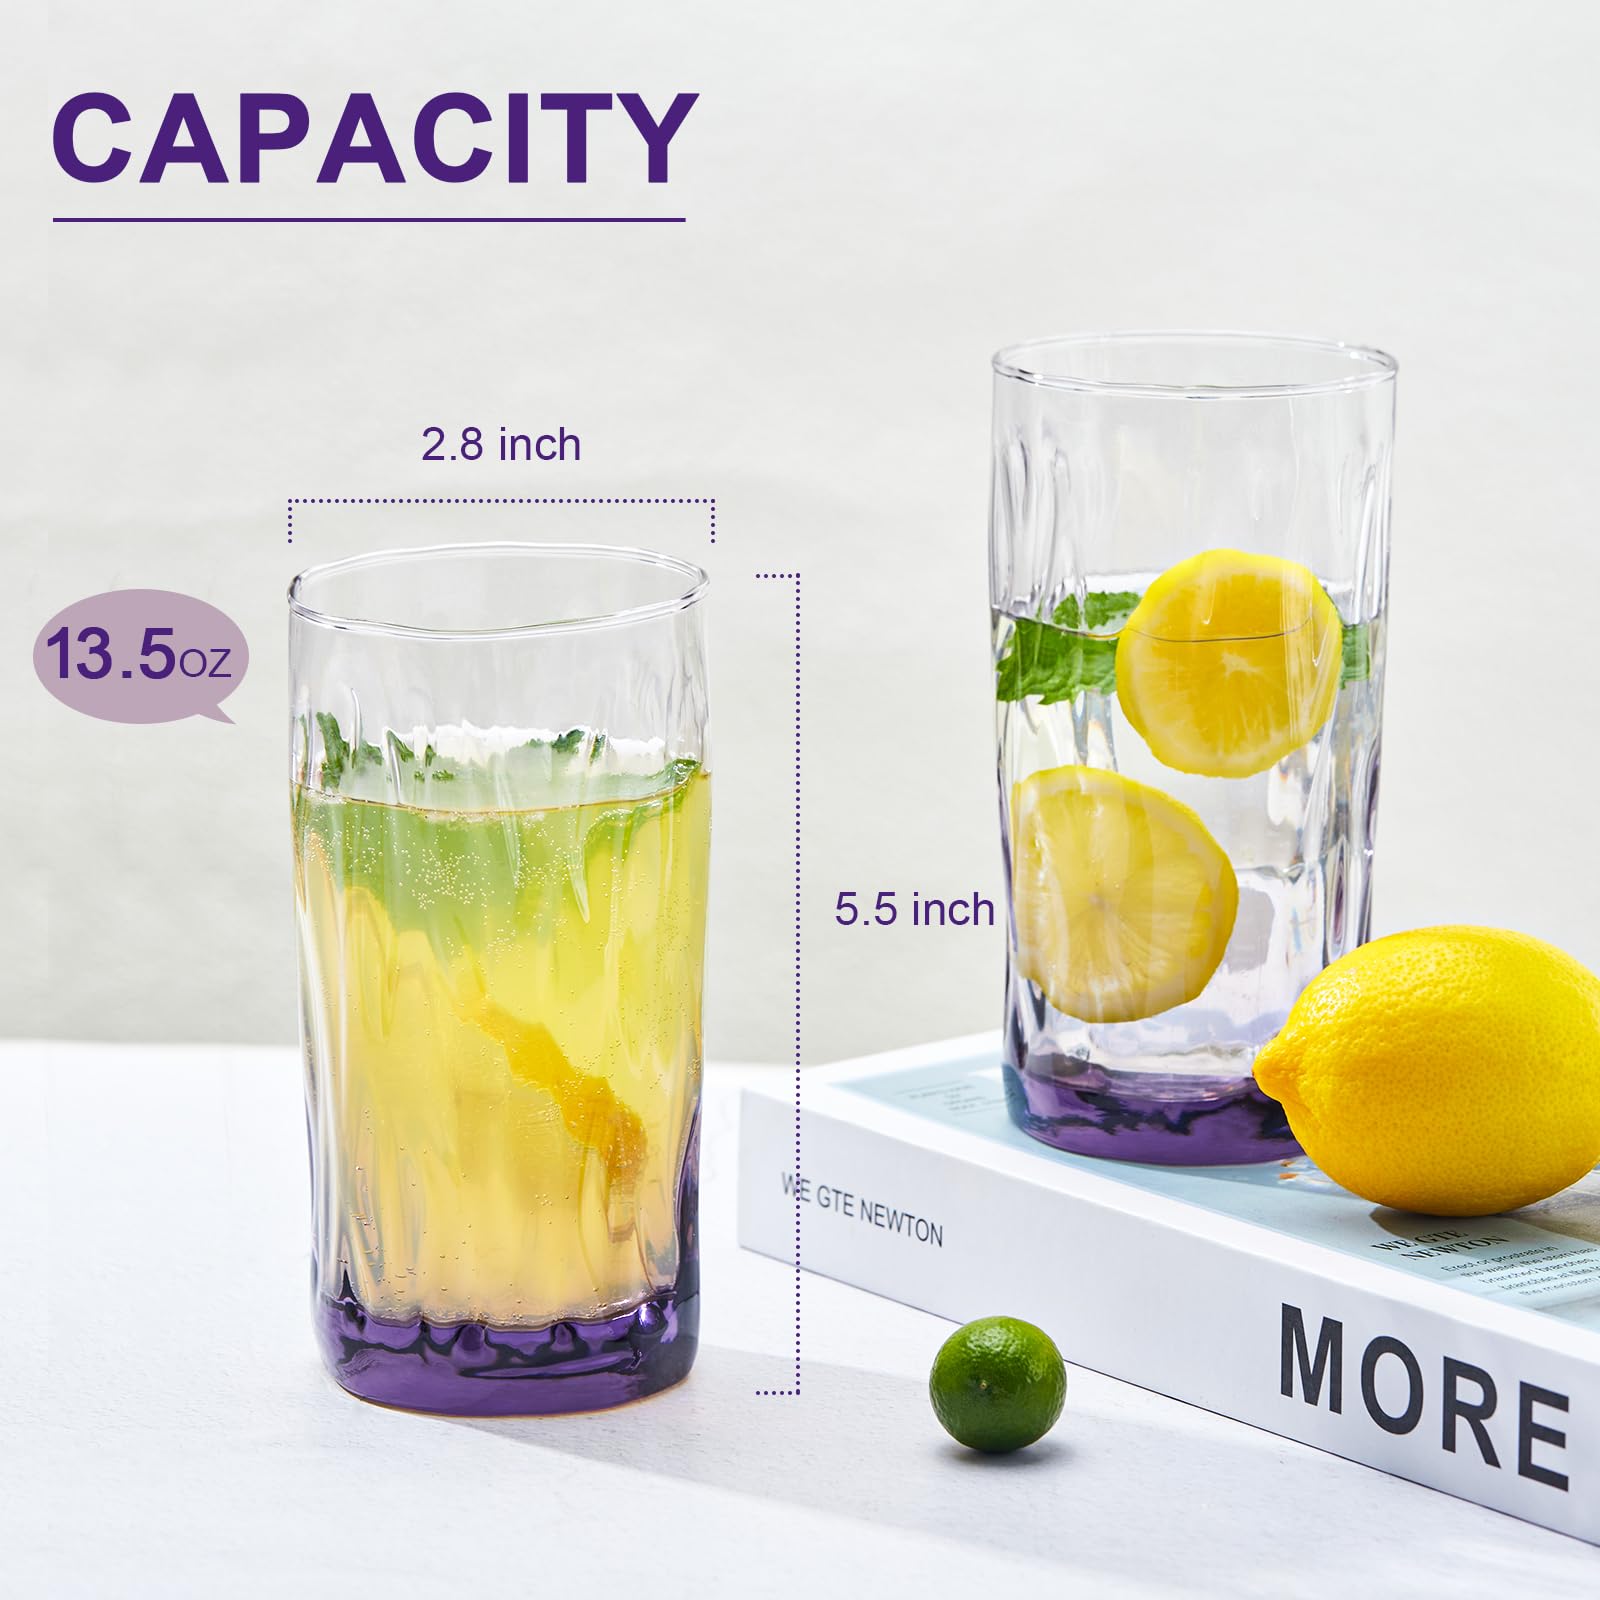 CREATIVELAND Solid Color Drinking Glasses Set of 6, 13.5 OZ Wind-blown Ripples Glass Tumbler Glassware for Water, Juice, Different Options for Home, Restaurant, Hotel, Bar,Purple